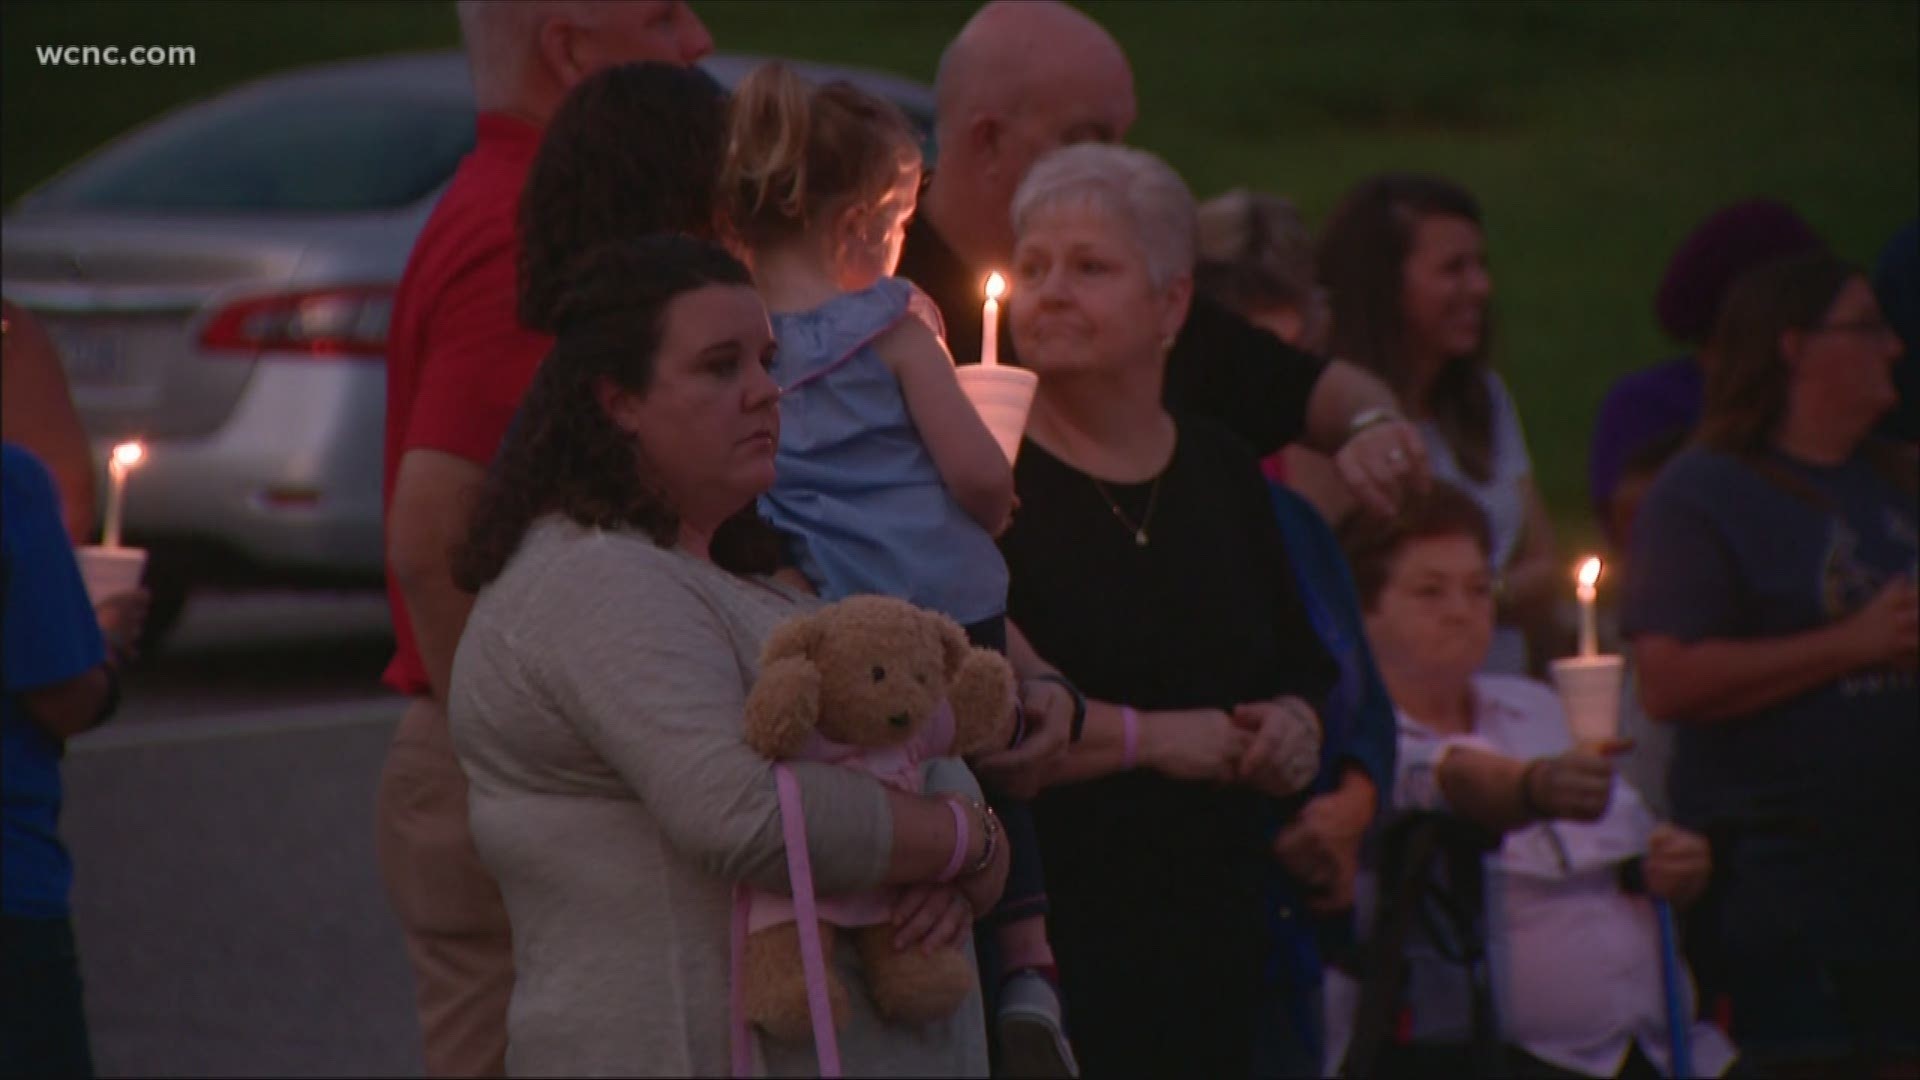 A community held a candlelight memorial to honor a little boy who disappeared last week.